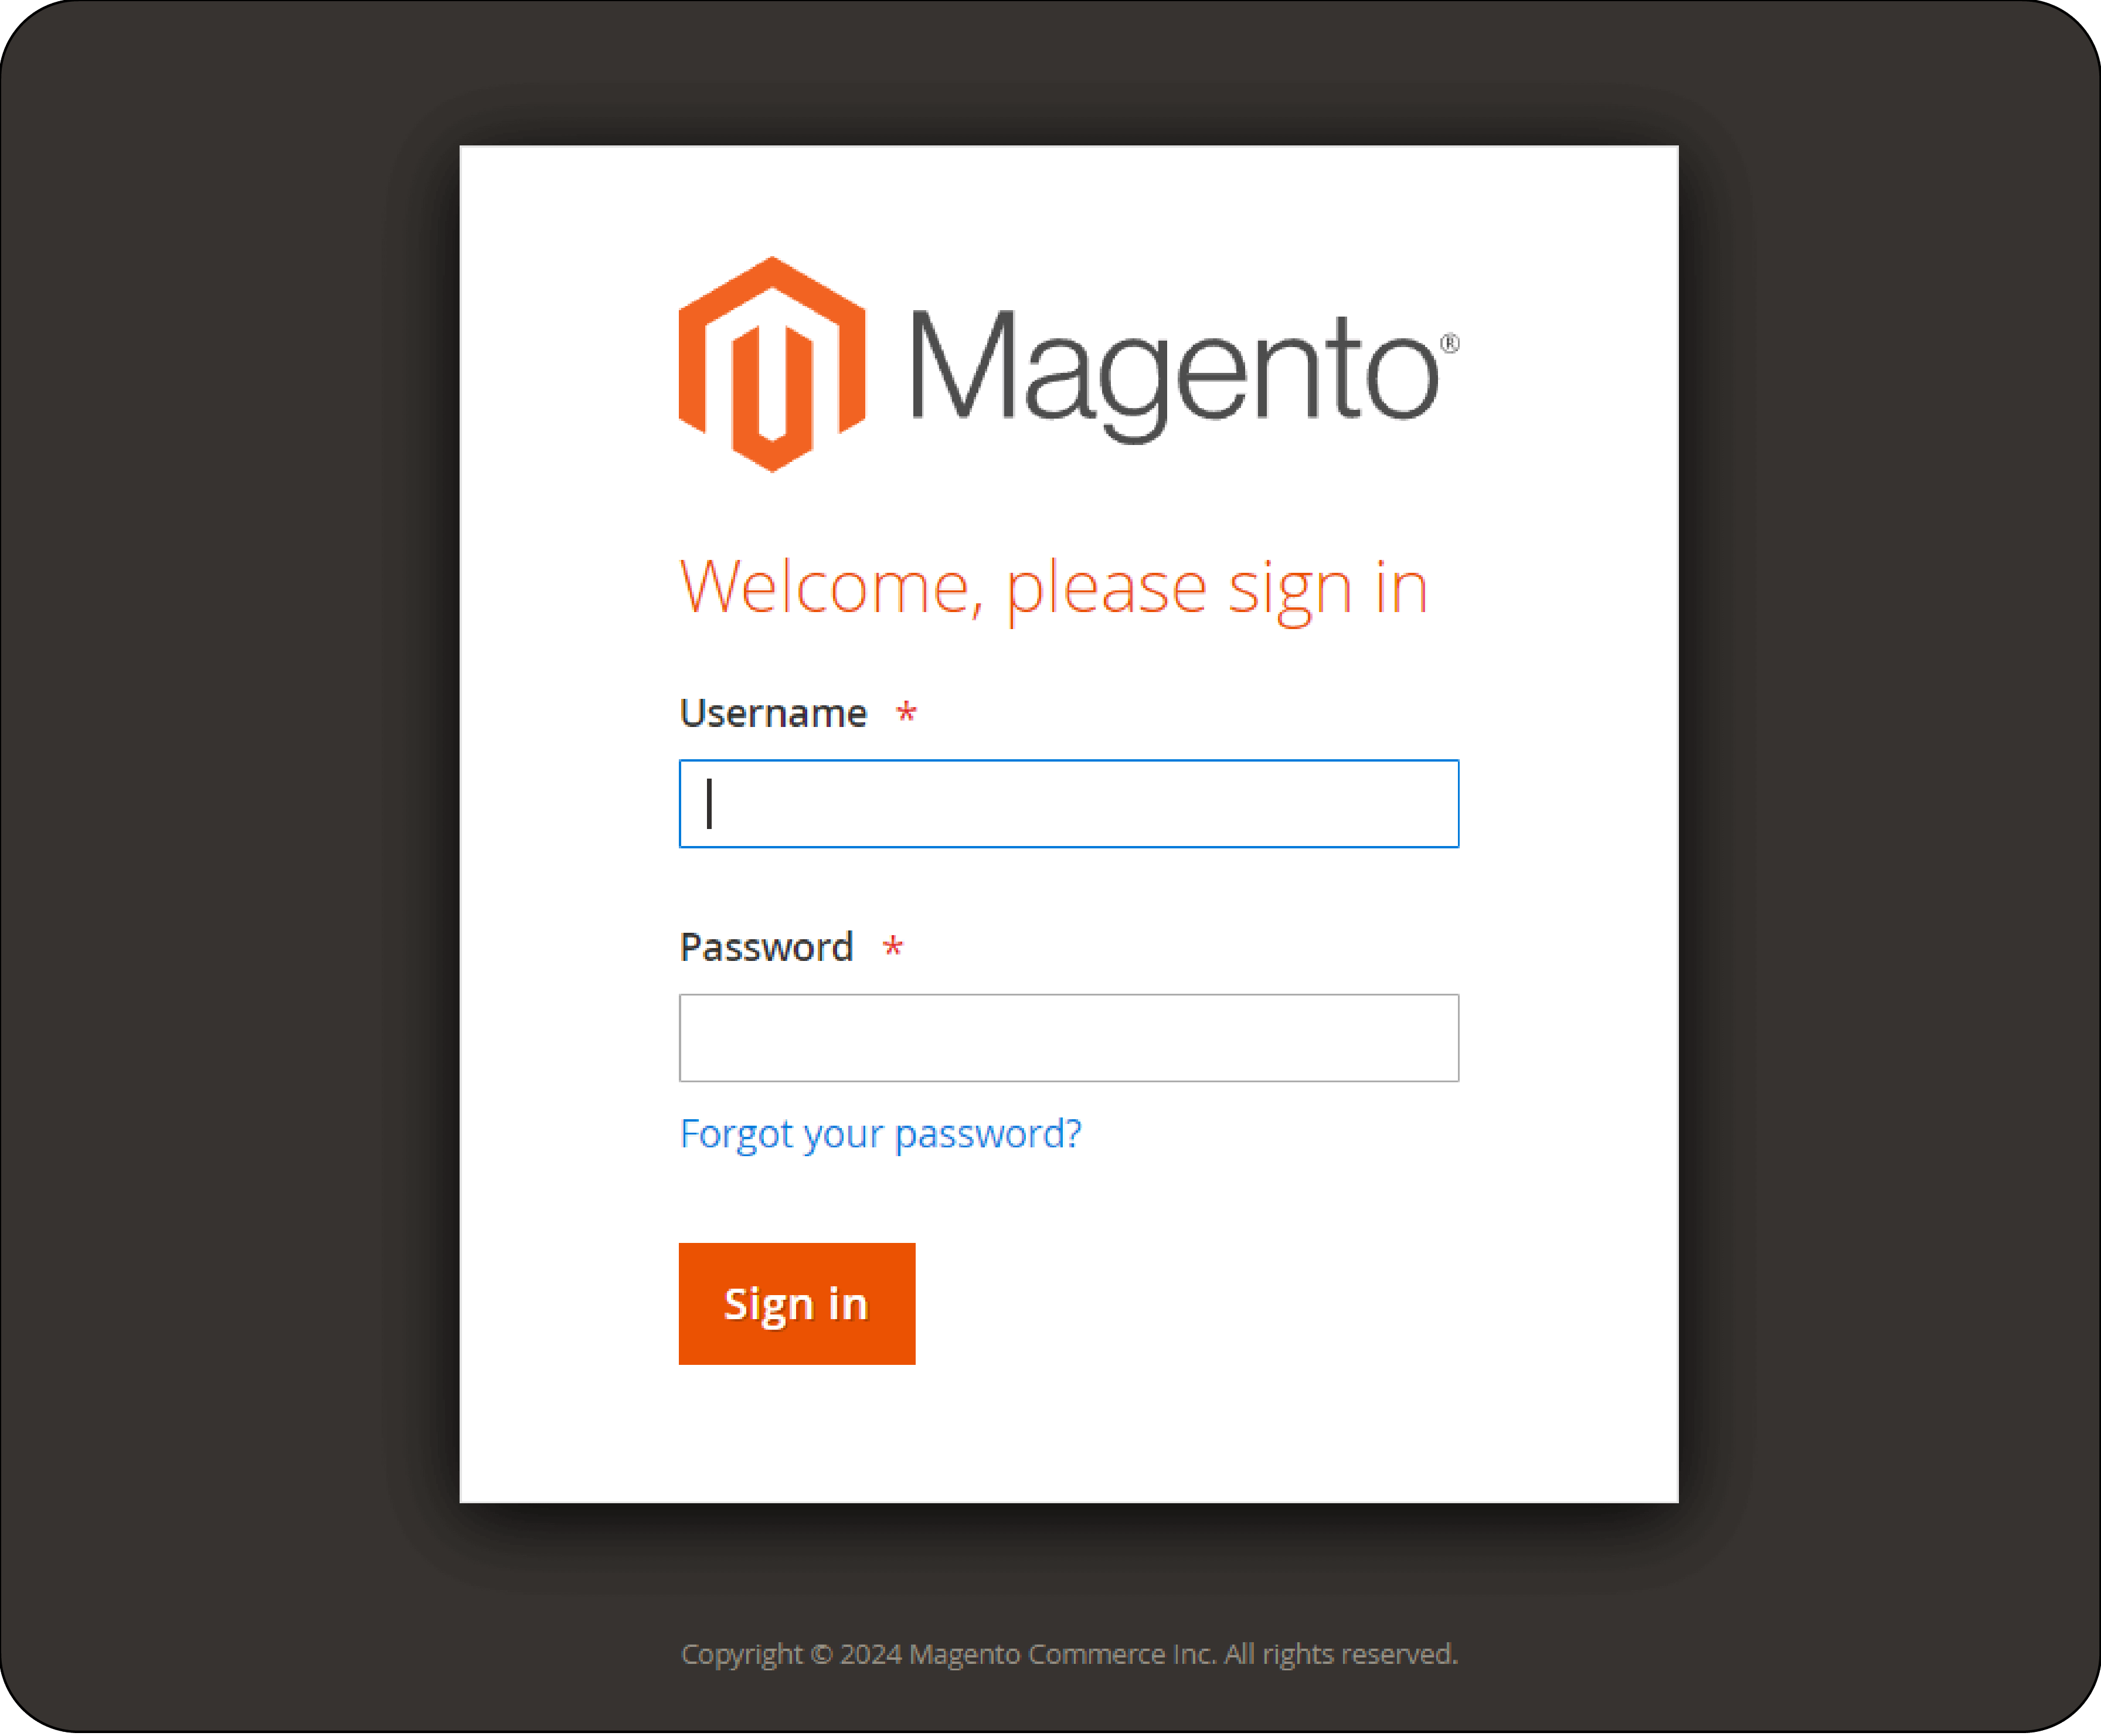 How to Install Magento 2 Page Builder - Access the Magento Admin Panel
